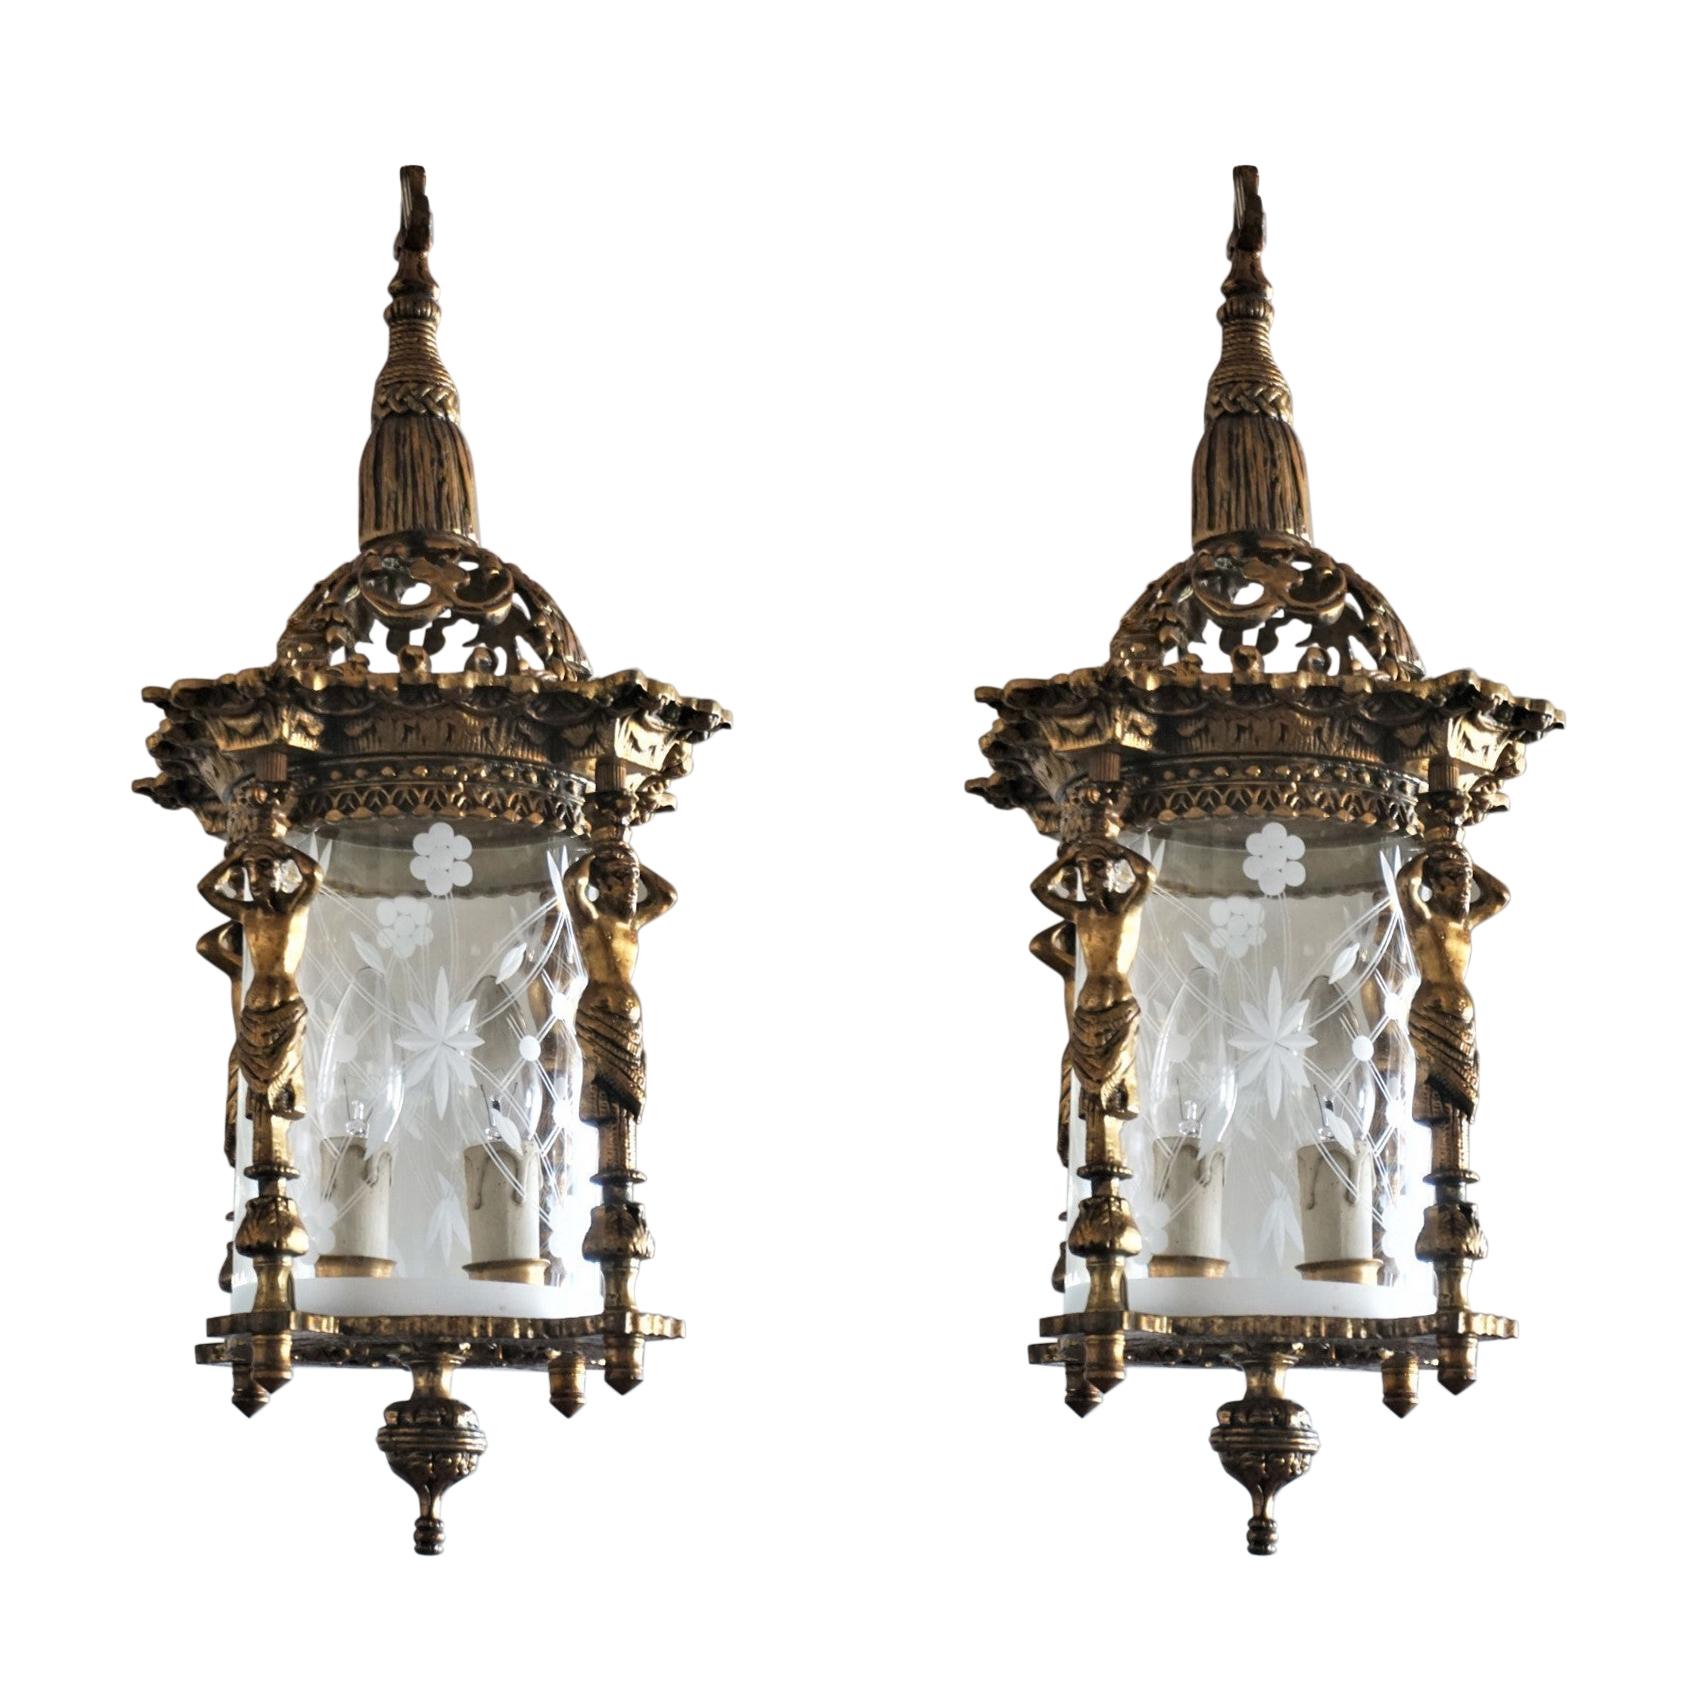 A pair of Empire style cast gilt bronze two-light candelabra lanterns with cut glass cylindrical shade surrounded by four figurine columns, France, late 19th century.
Both lanterns are in very good condition, gorgeous aged patina to bronze,